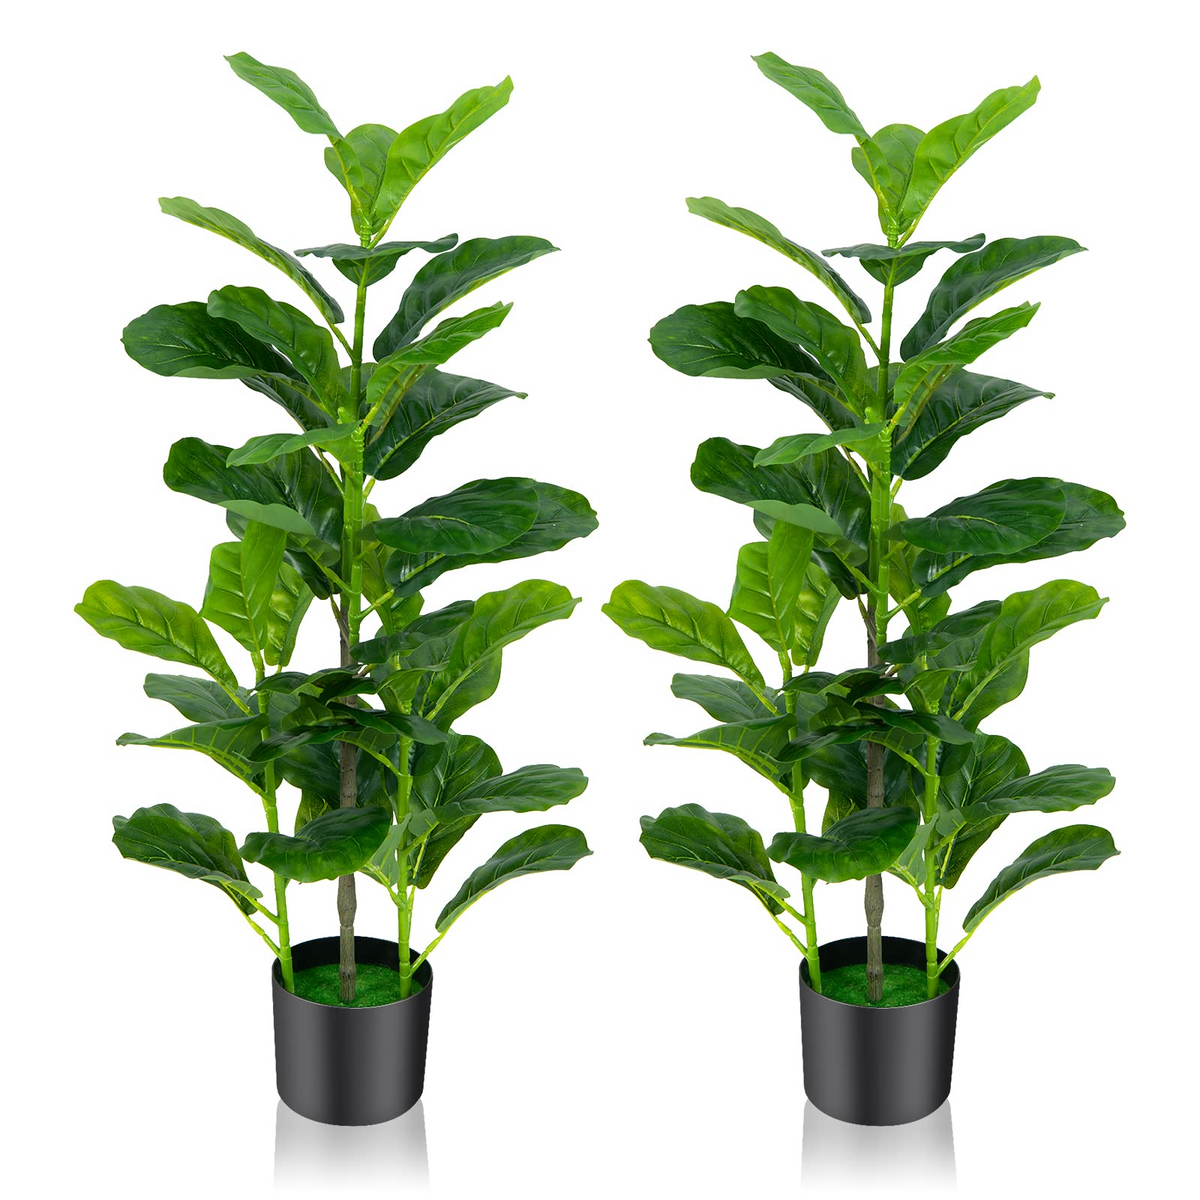 Goplus Fake Fiddle Leaf Fig Tree, 2-Pack 3.3 FT Tall Artificial Tree Greenery Plants in Pots W/40 Leaves - GoplusUS